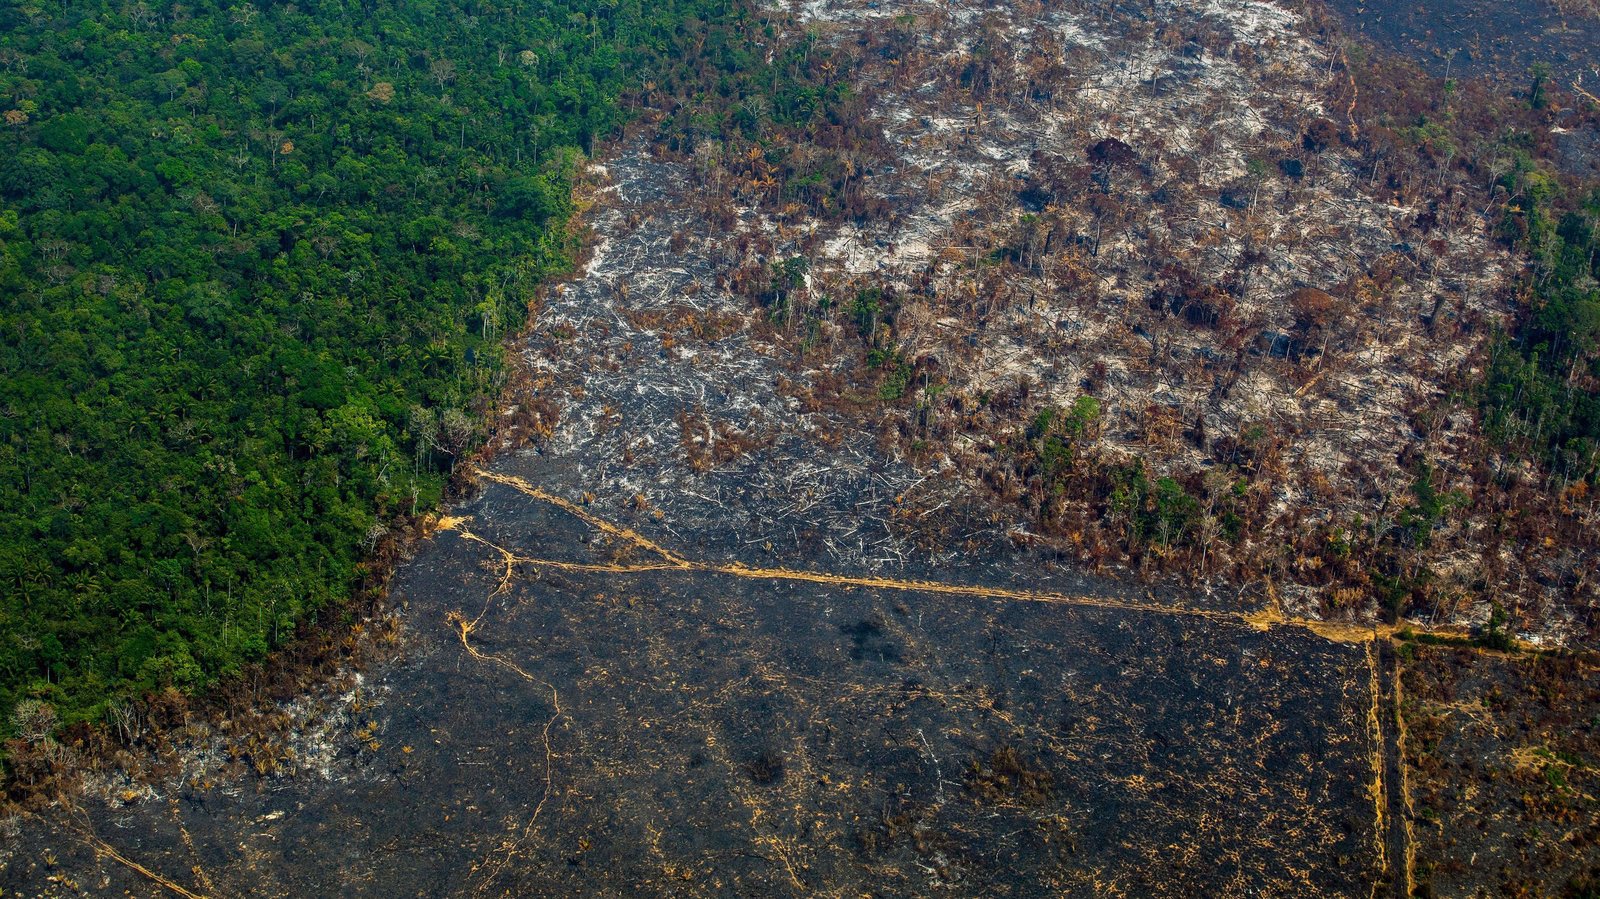 An aerial view of the Cachimbo Biological Reserve in Altamira, Brazil, reveals the scale of the burned land in the Amazon basin, in August 2019. Critics of Brazilian President Jair Bolsonaro trace the recent spike in fires to his administration’s anti-environmental policies. Photo: João Laet / AFP / Getty Images